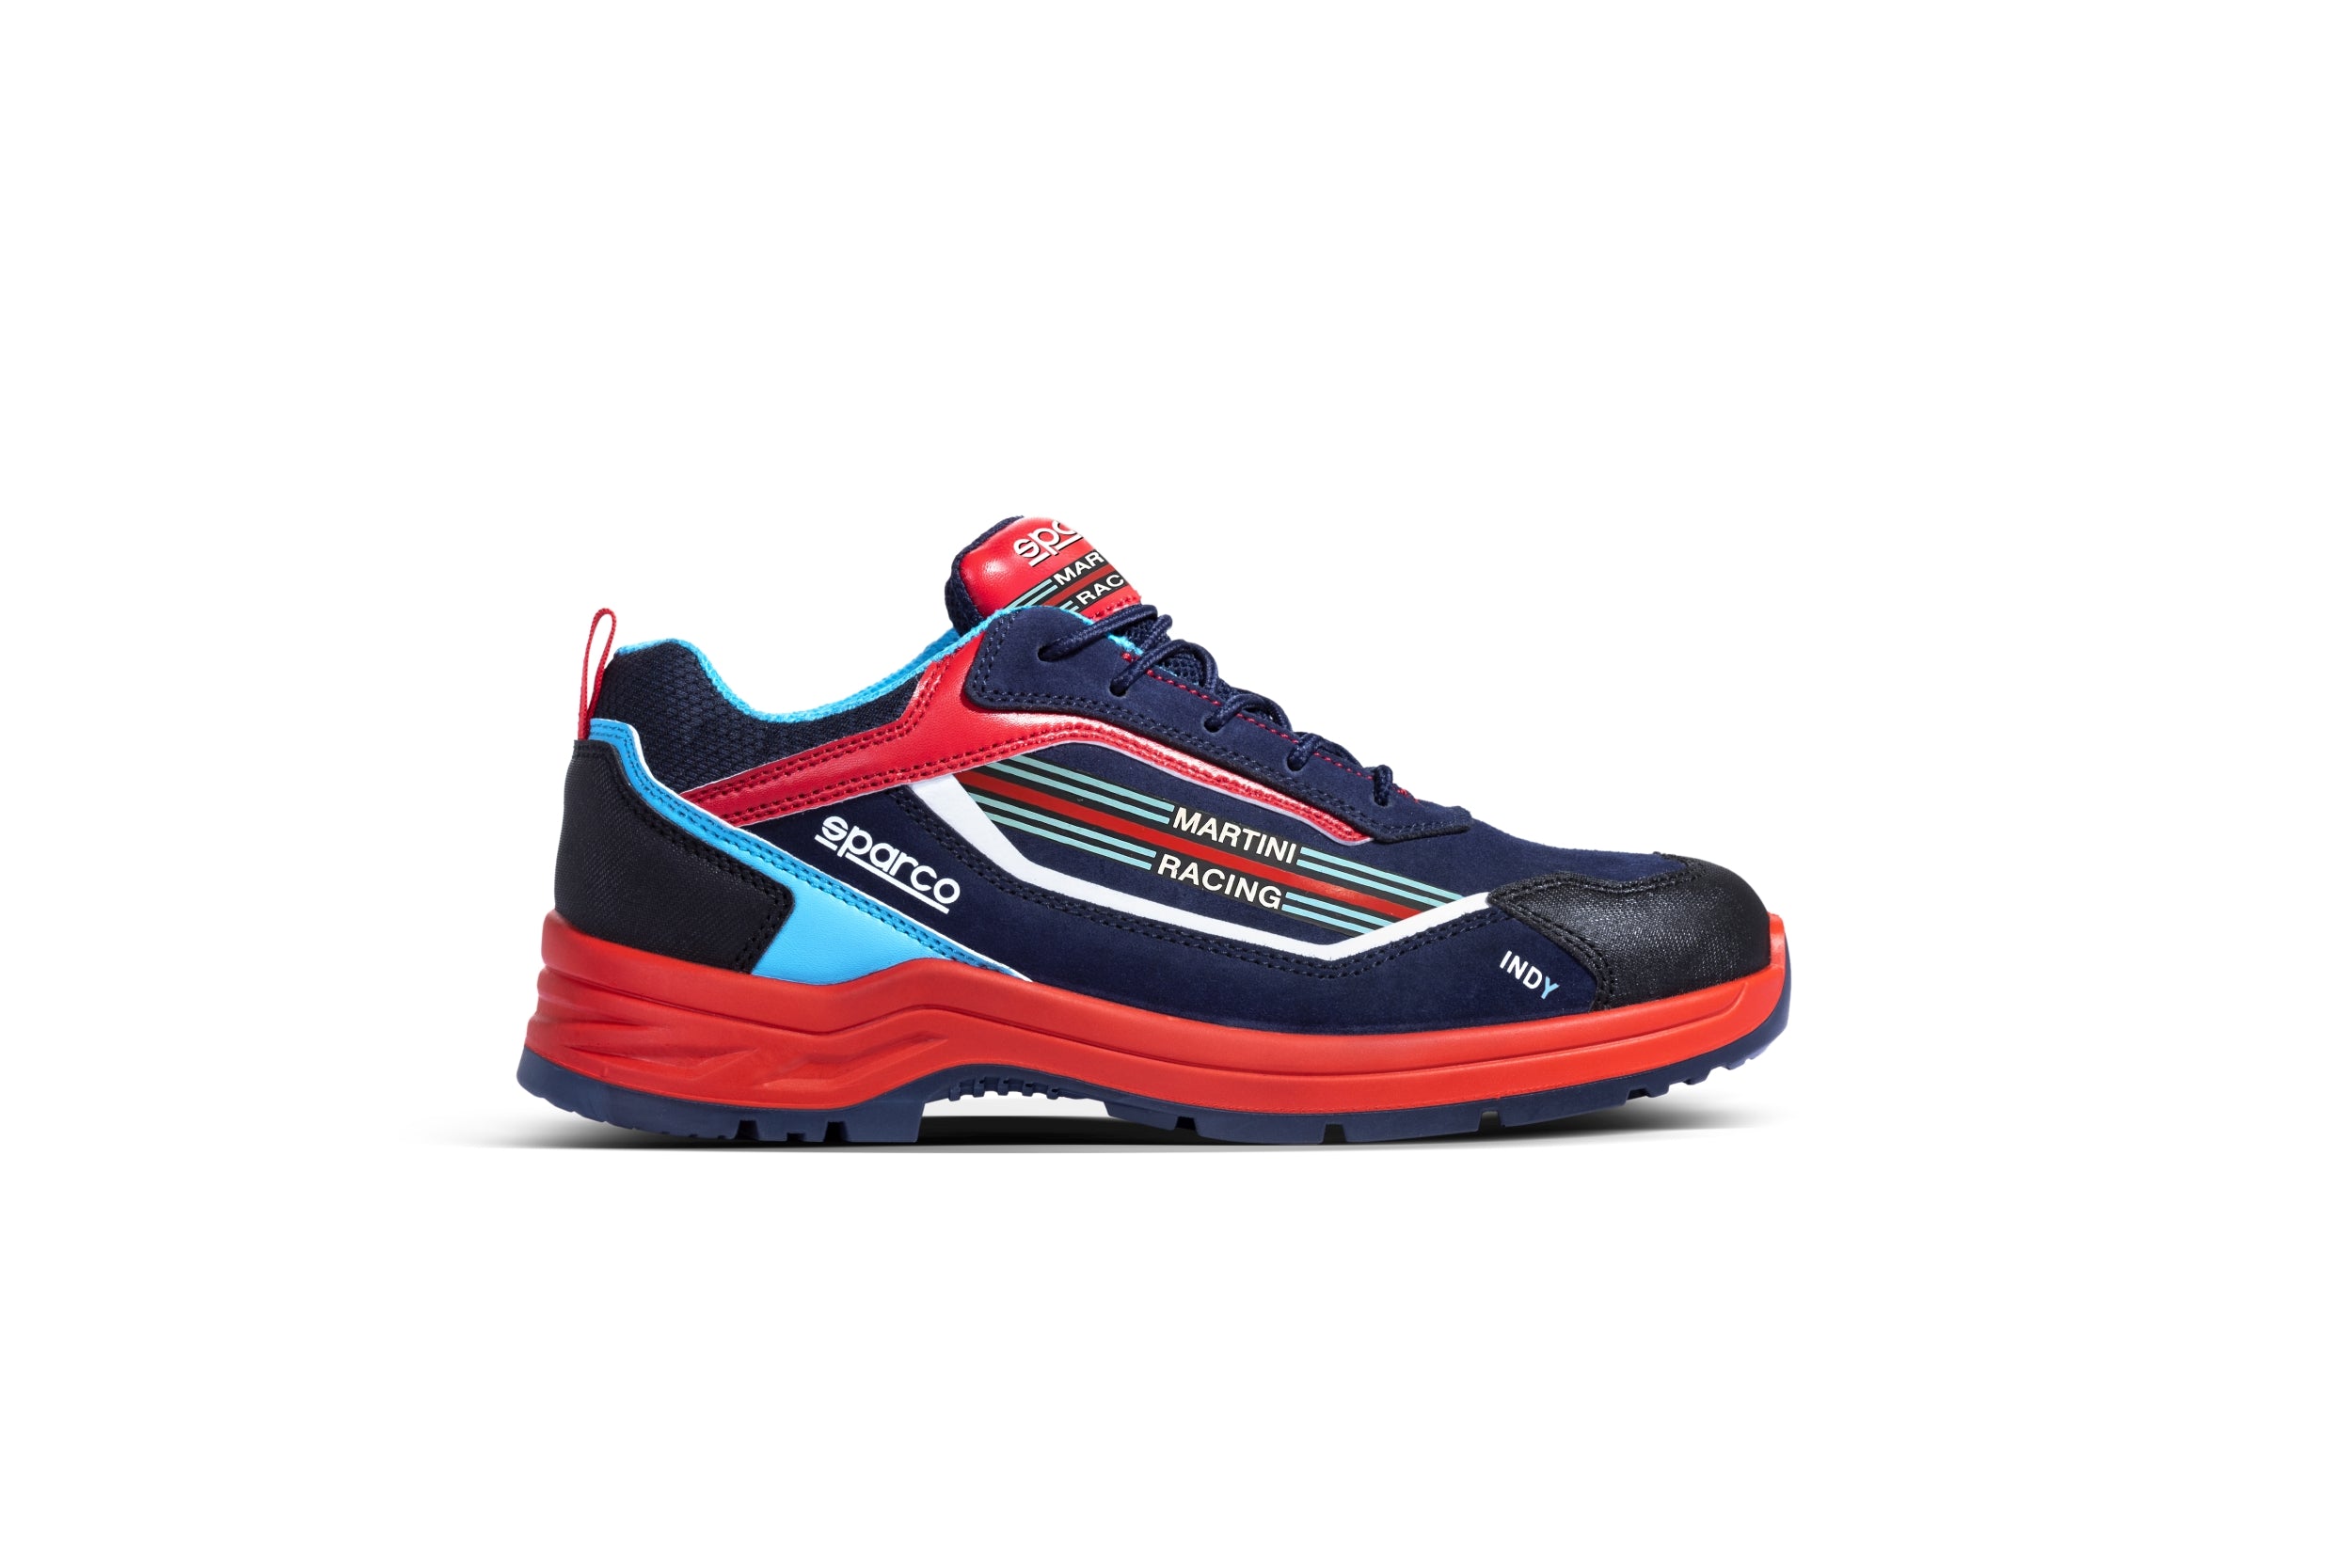 SPARCO 07537MR35BMRS Indy ESD S3 MARTINI RACING Shoes, navy blue/red, size 35 Photo-2 